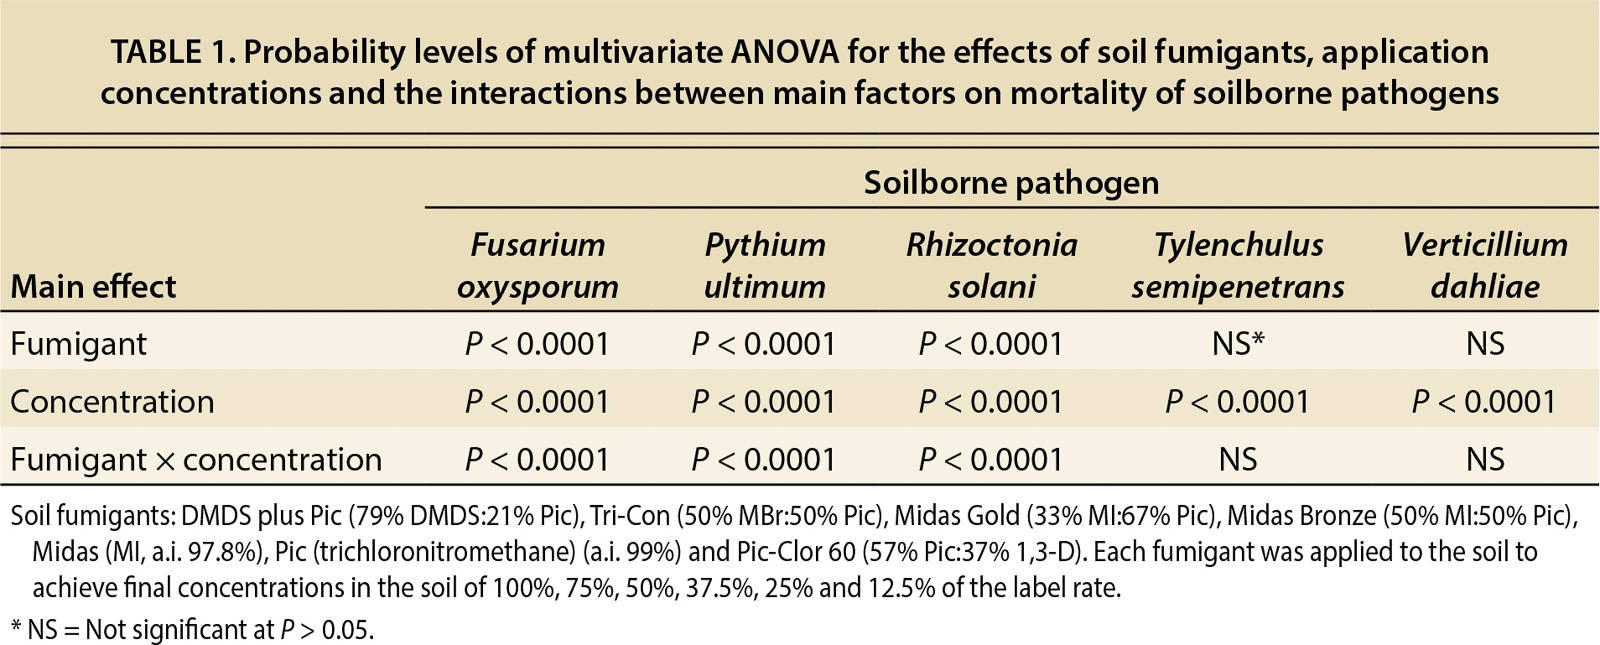 Probability levels of multivariate ANOVA for the effects of soil fumigants, application concentrations and the interactions between main factors on mortality of soilborne pathogens